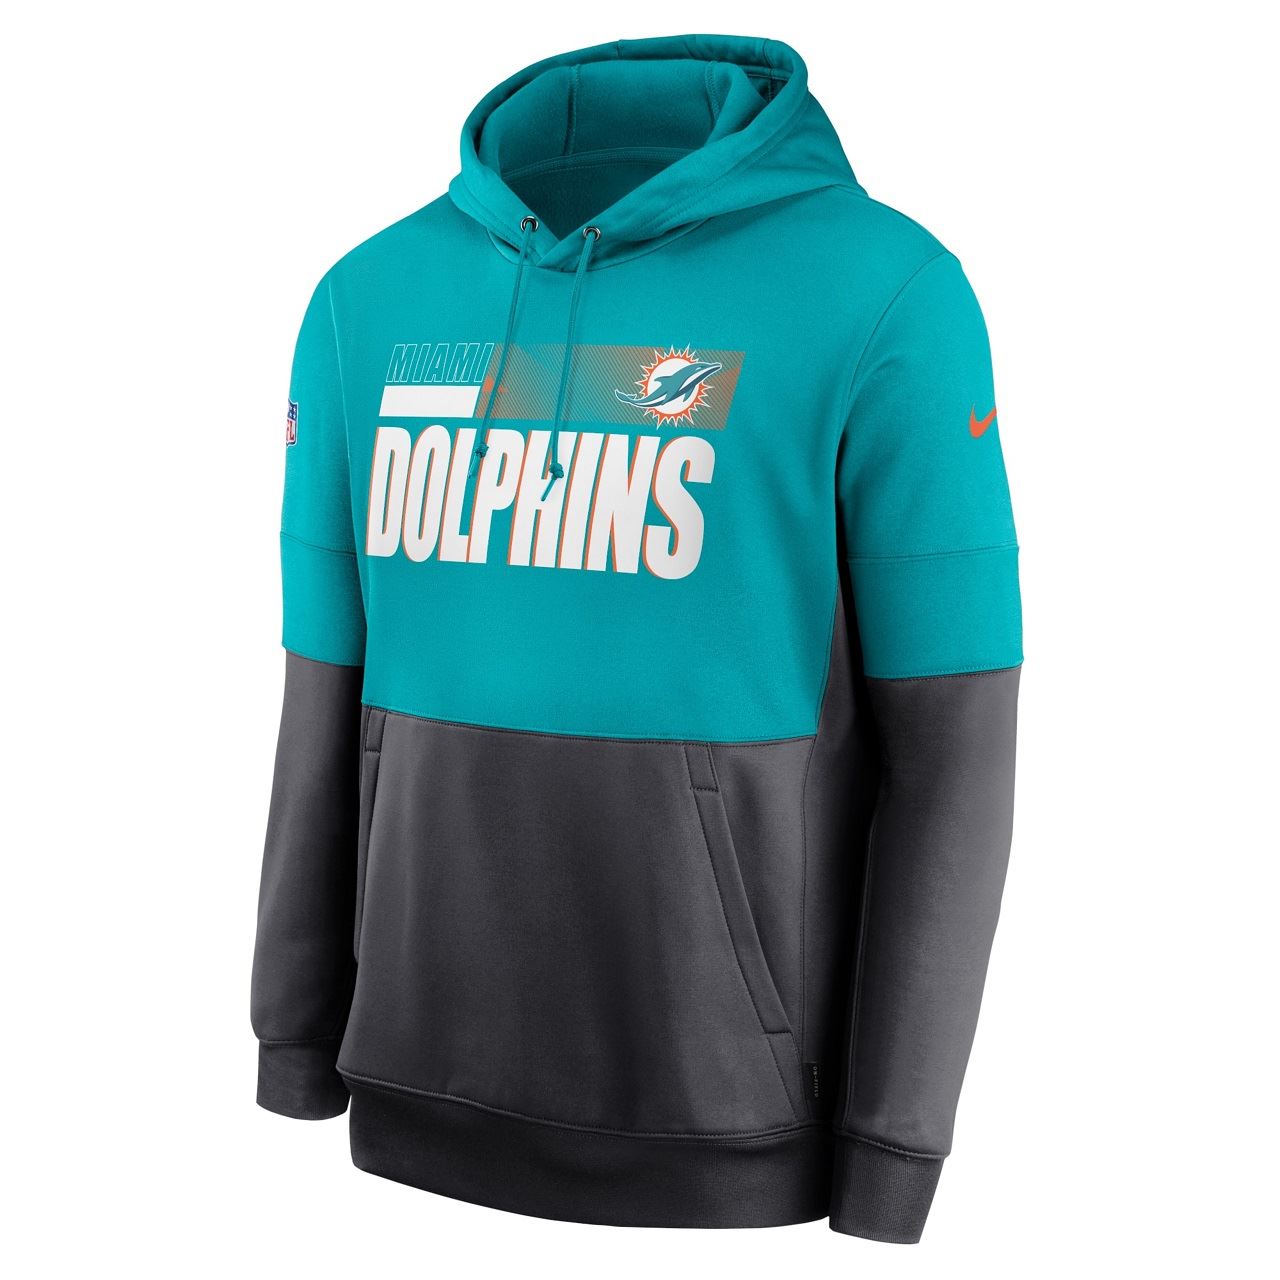 Miami Dolphins NFL Team Name Lockup Therma Pullover Turbo Green / Anthracite Hoody Nike